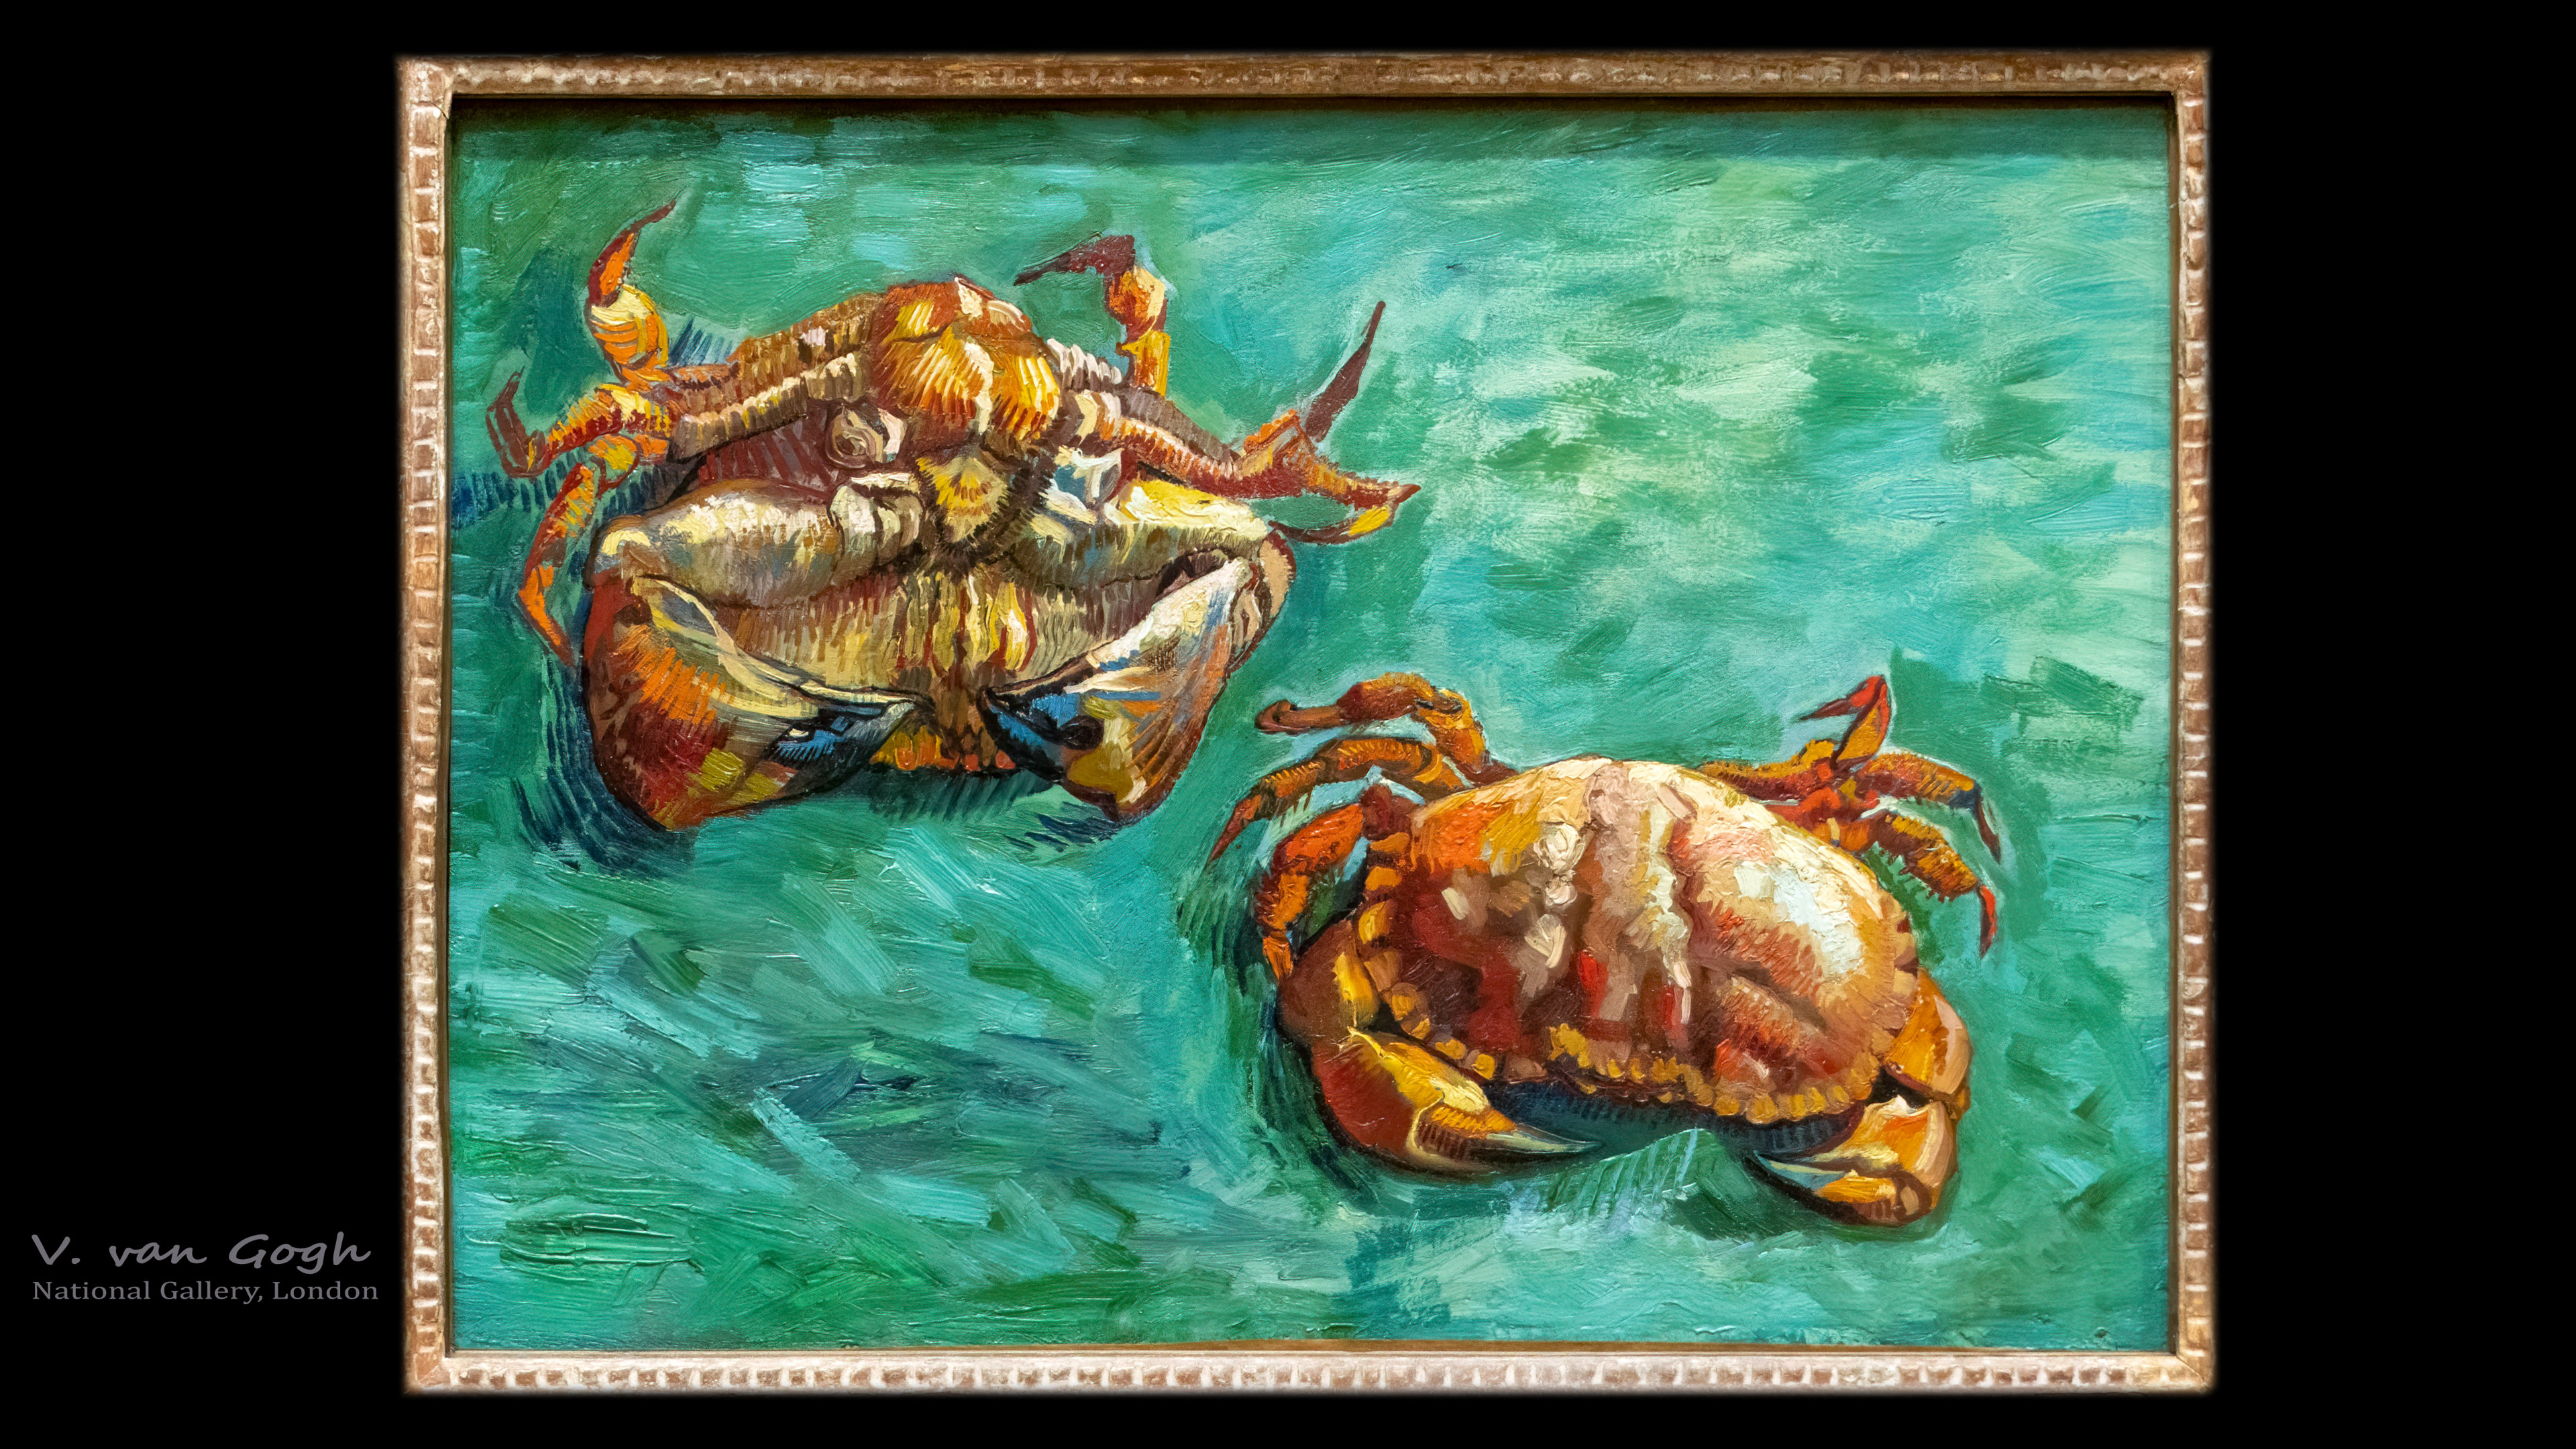 Two Crabs scuttle across your screens, each pinch and stroke captured in high resolution 4K Ultra HD wallpaper, a testament to Van Gogh's nuanced artistry.